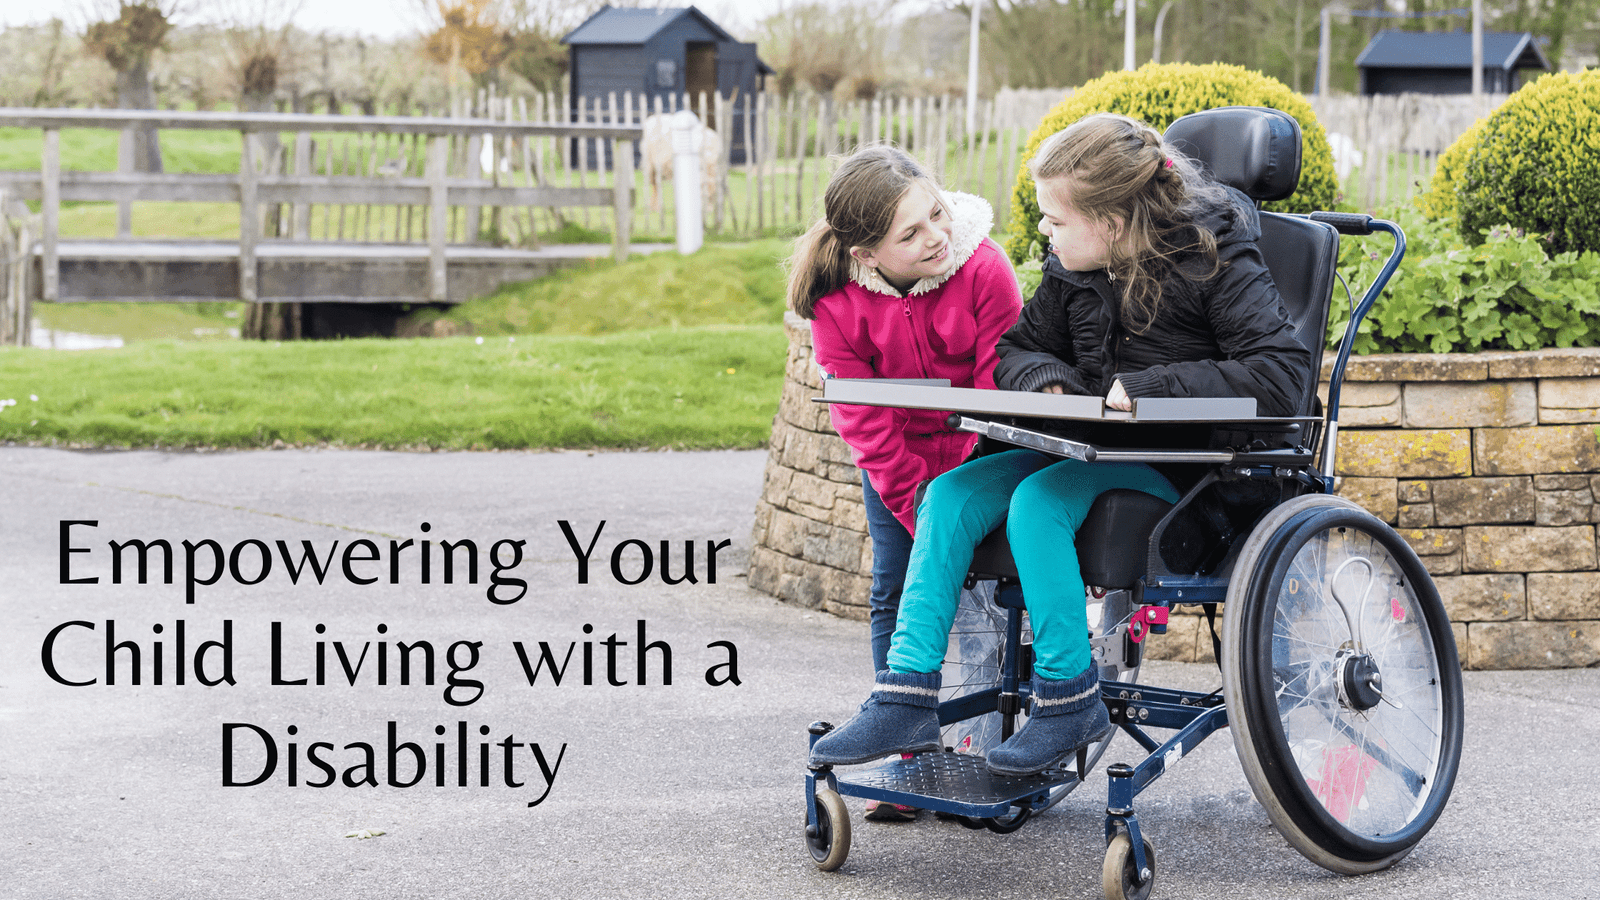 Empowering Your Child Living with a Disability